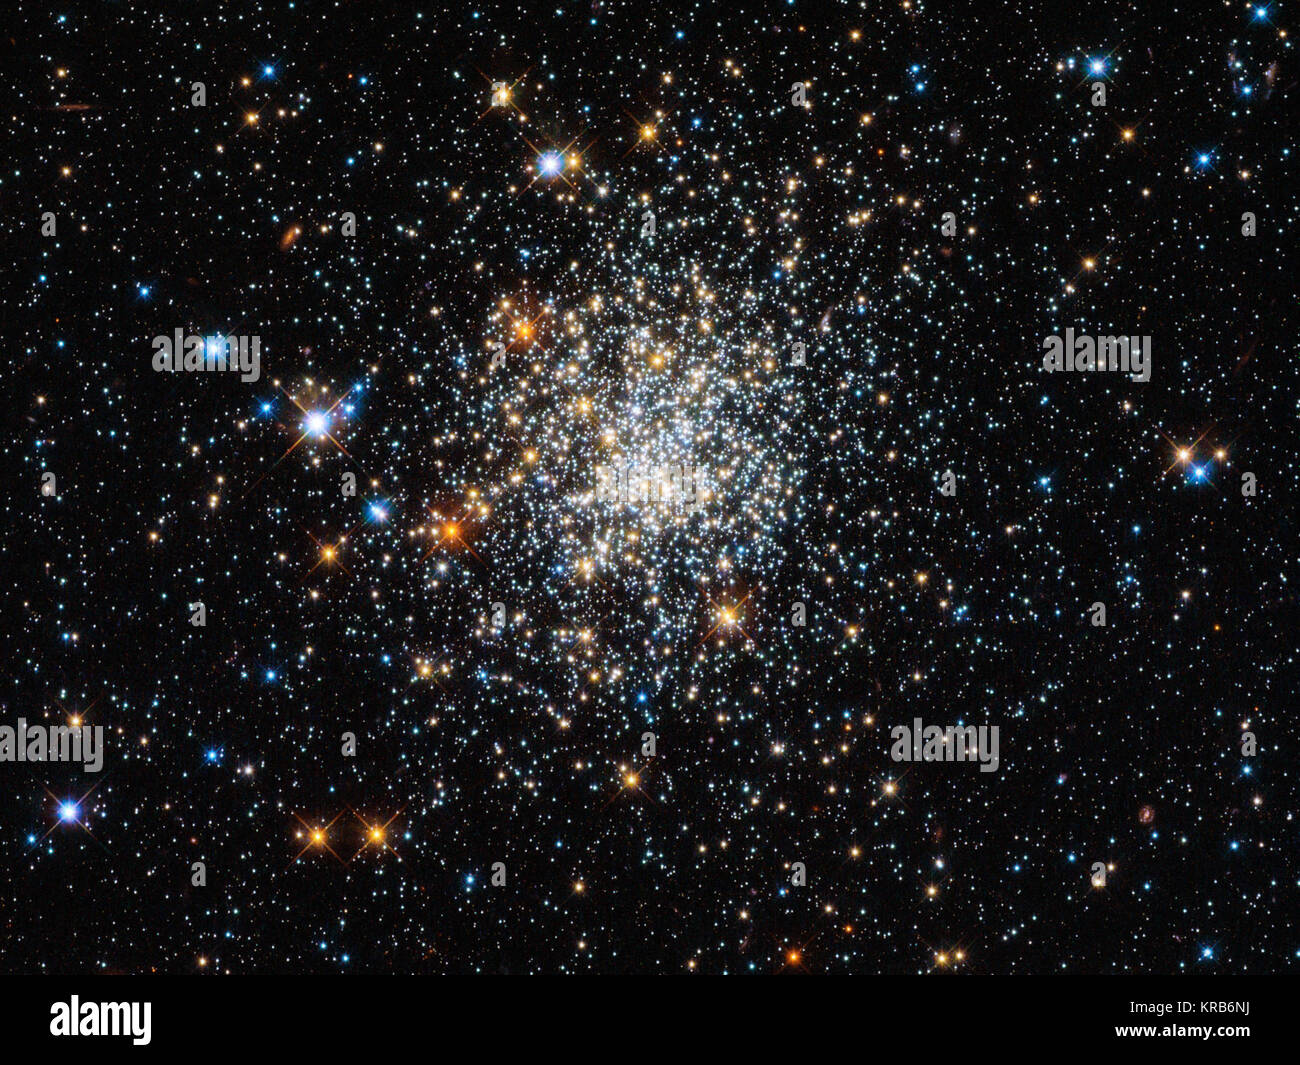 Globular  clusters are roughly spherical collections of extremely old stars, and  around 150 of them are scattered around our galaxy. Hubble is one of the  best telescopes for studying these, as its extremely high resolution  lets astronomers see individual stars, even in the crowded core. The  clusters all look very similar, and in Hubble’s images it can be quite  hard to tell them apart – and they all look much like NGC 411, pictured  here. And  yet appearances can be deceptive: NGC 411 is in fact not a globular  cluster, and its stars are not old. It isn’t even in the Milky Way. NGC  411 is Stock Photo